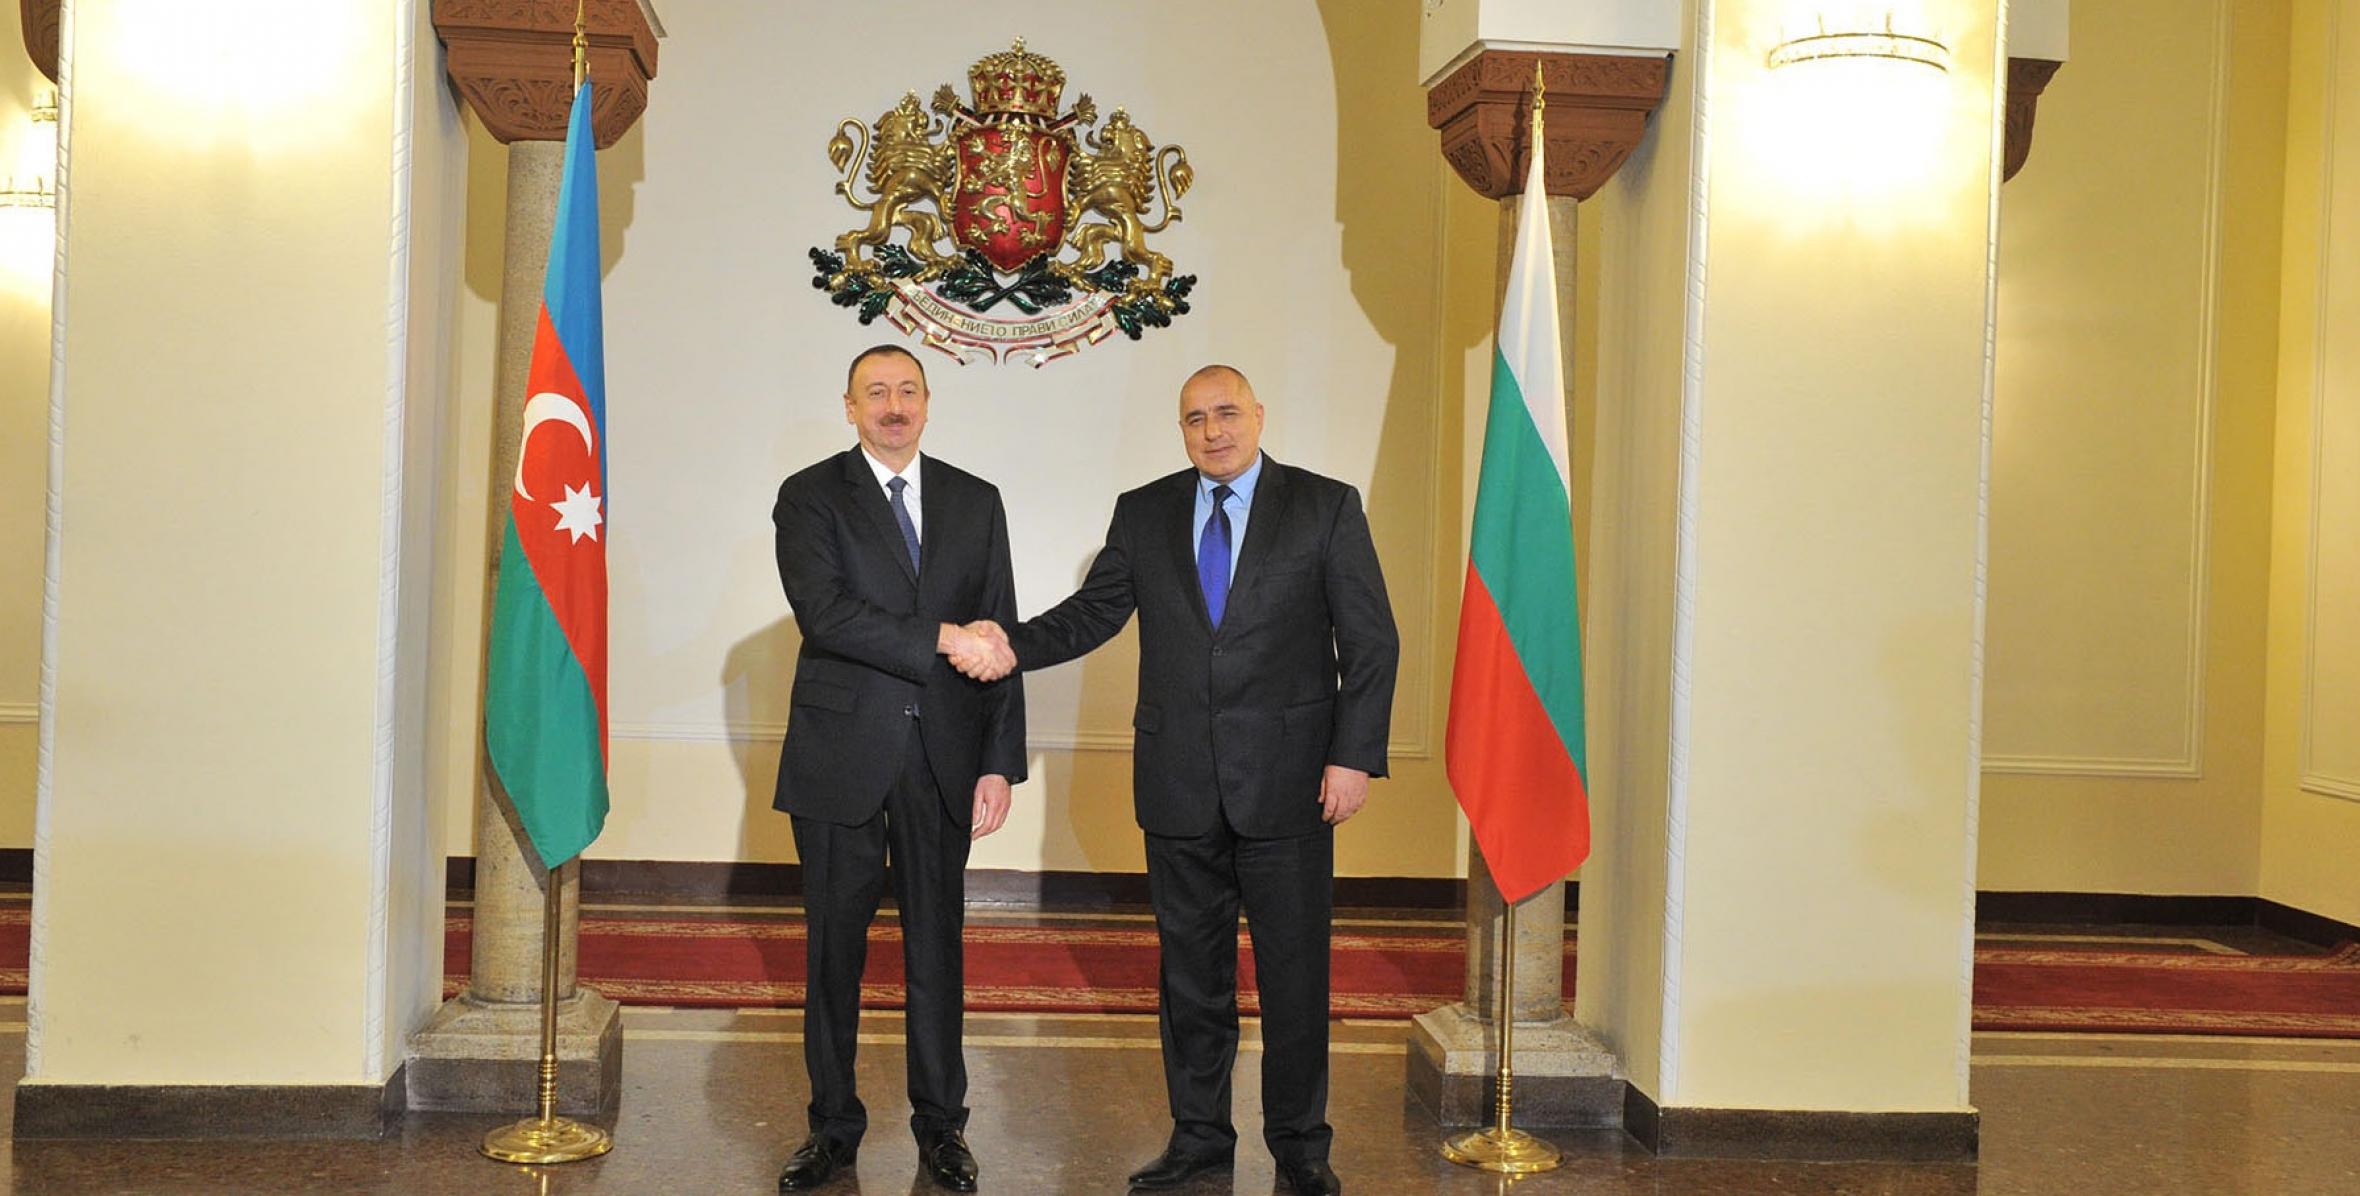 Ilham Aliyev and Prime Minister of Bulgaria Boyko Borisov held a one-on-one meeting